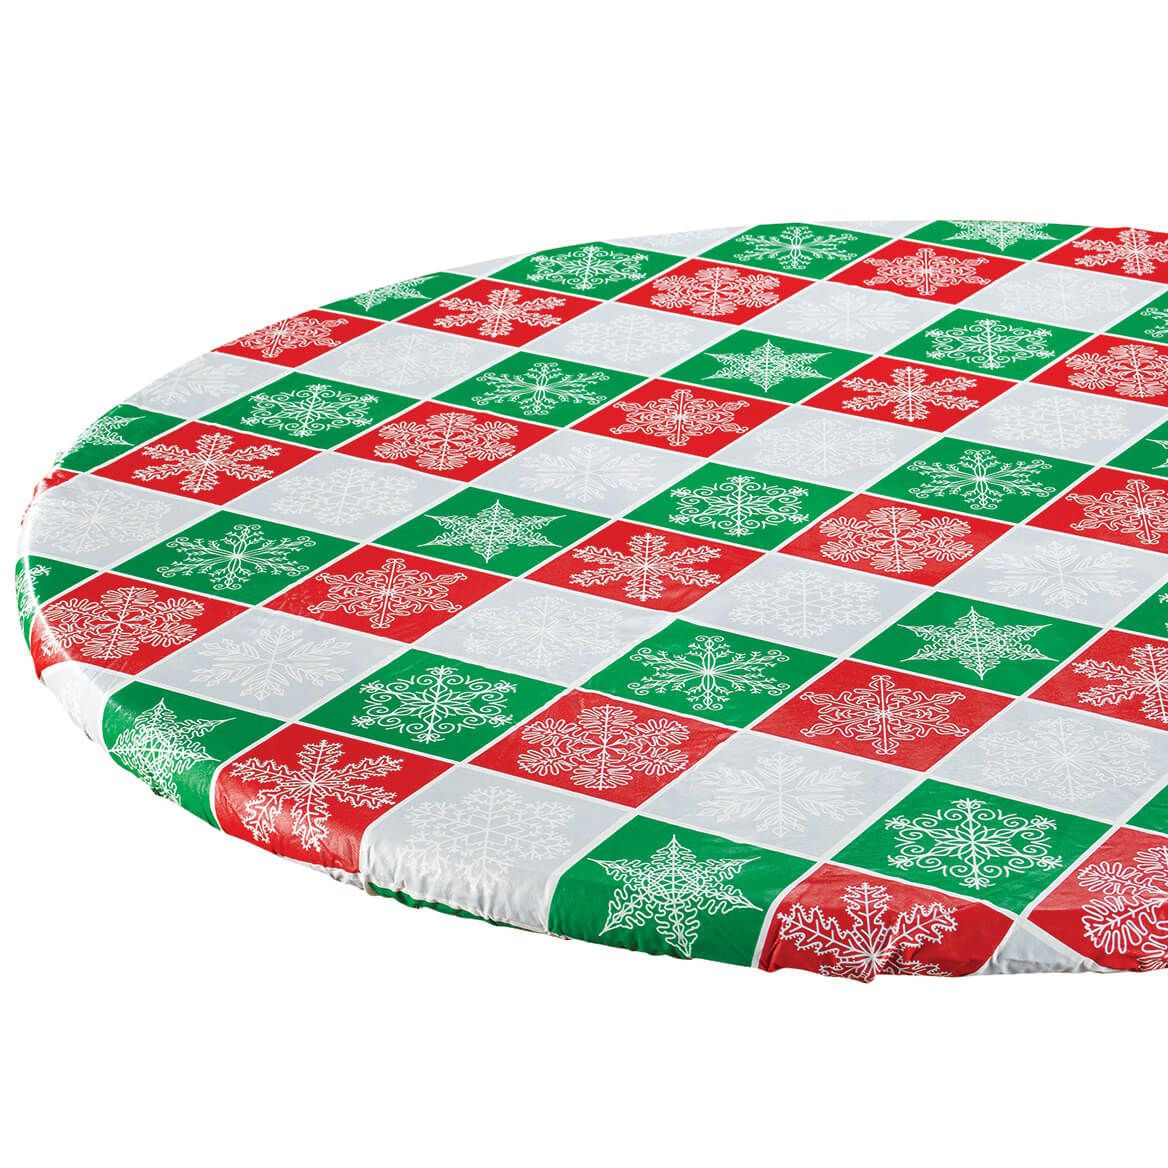 Snowflake Plaid Elasticized Table Cover by Chef's Pride™ + '-' + 372389